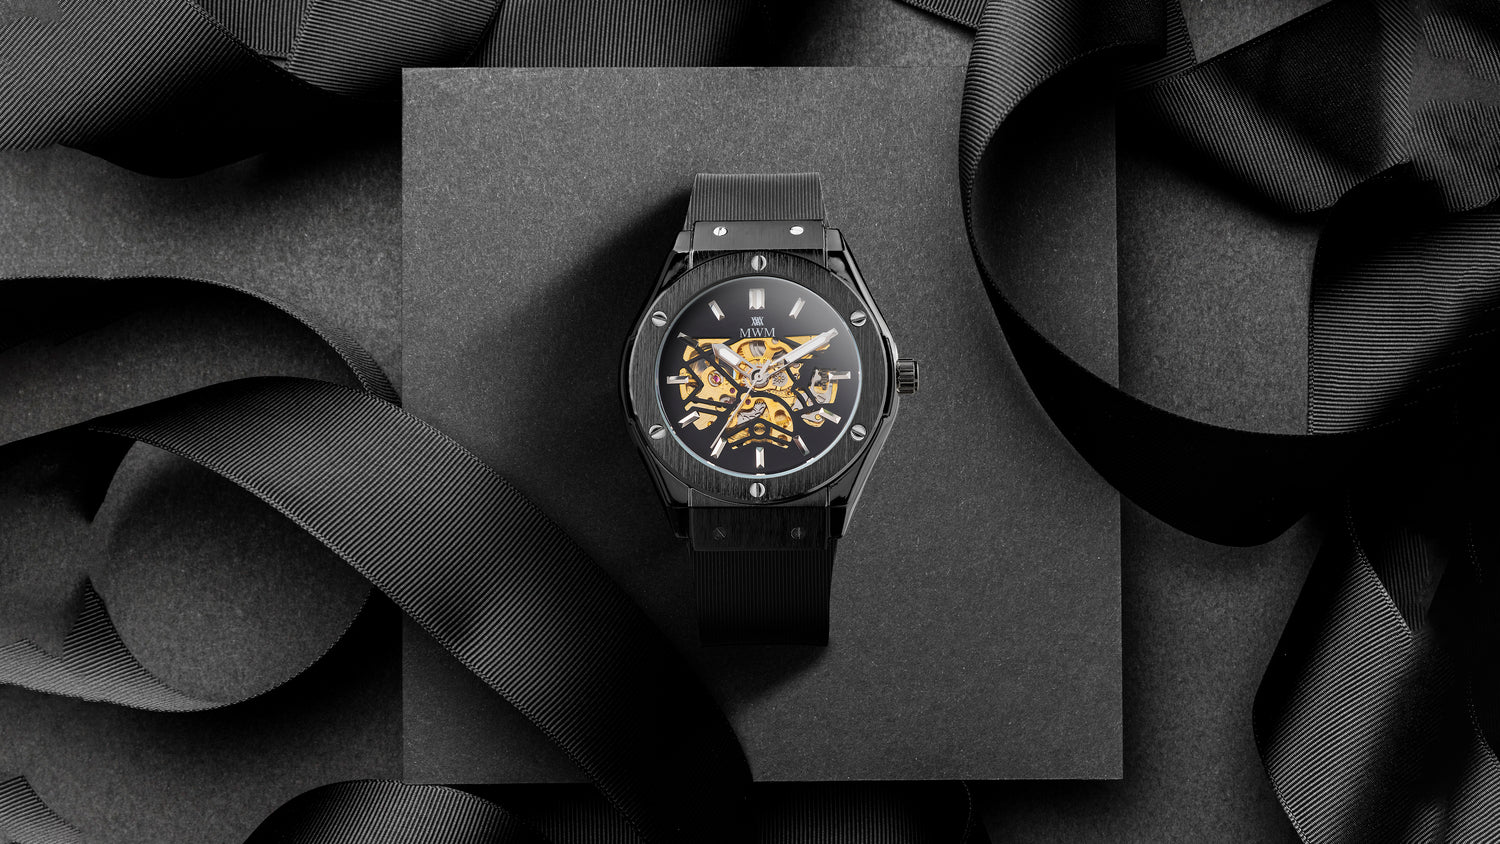 Noir Mars is a black watch with gold automatic movement on a black background - Representing Mark W. Morrison's vision of great watches at fair prices, inspired by the father of the modern chronometer and Audemars Piguet